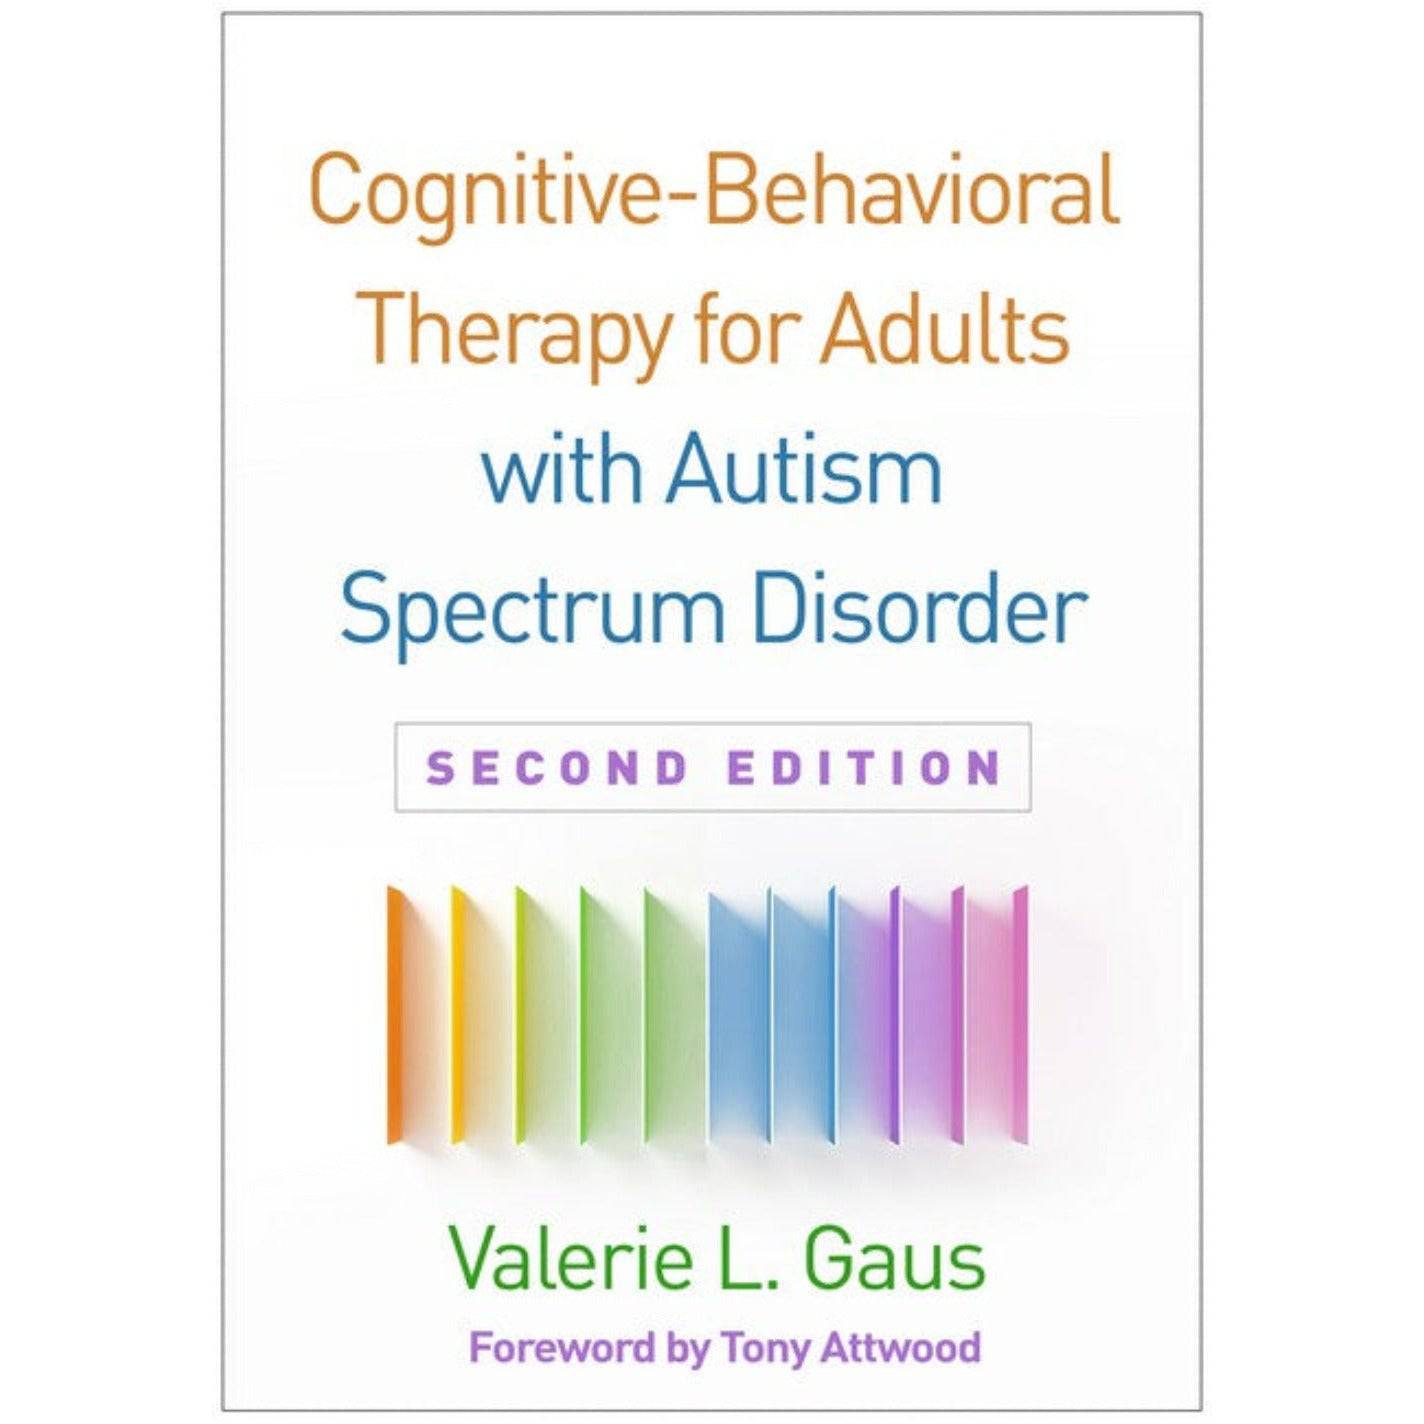 Cognitive-Behavioral Therapy for Adults with Autism Spectrum Disorder 2nd Edition - Sensory Circle